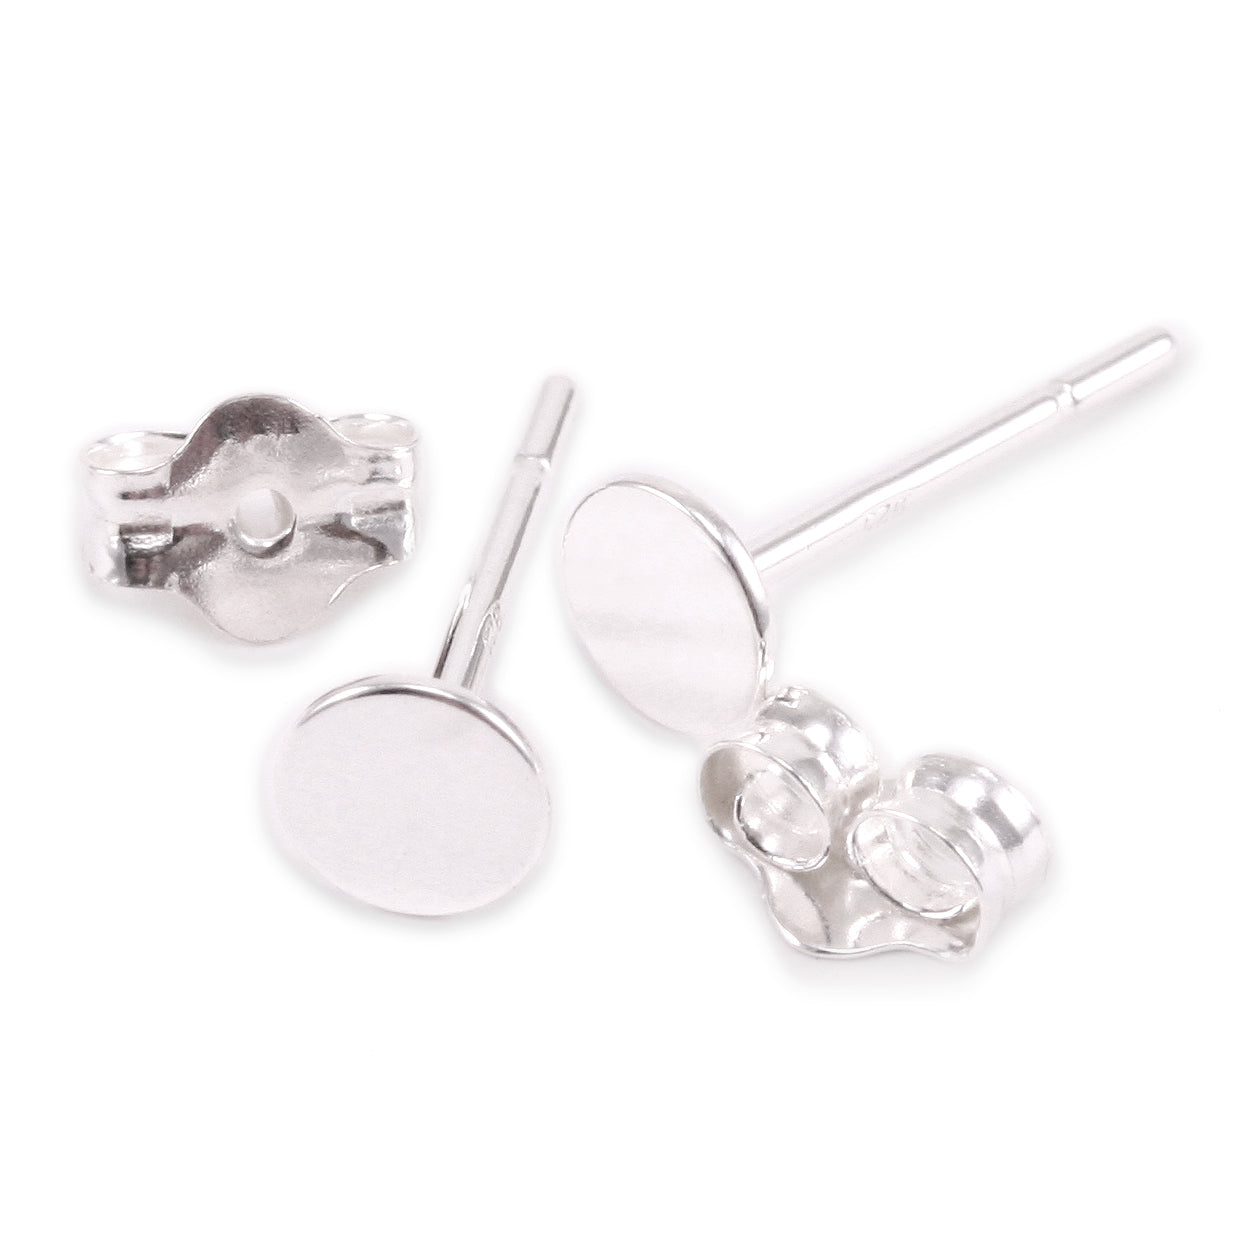 Sterling Silver Flat Pad Earring Posts with Pair of Backs, 4mm – Beaducation